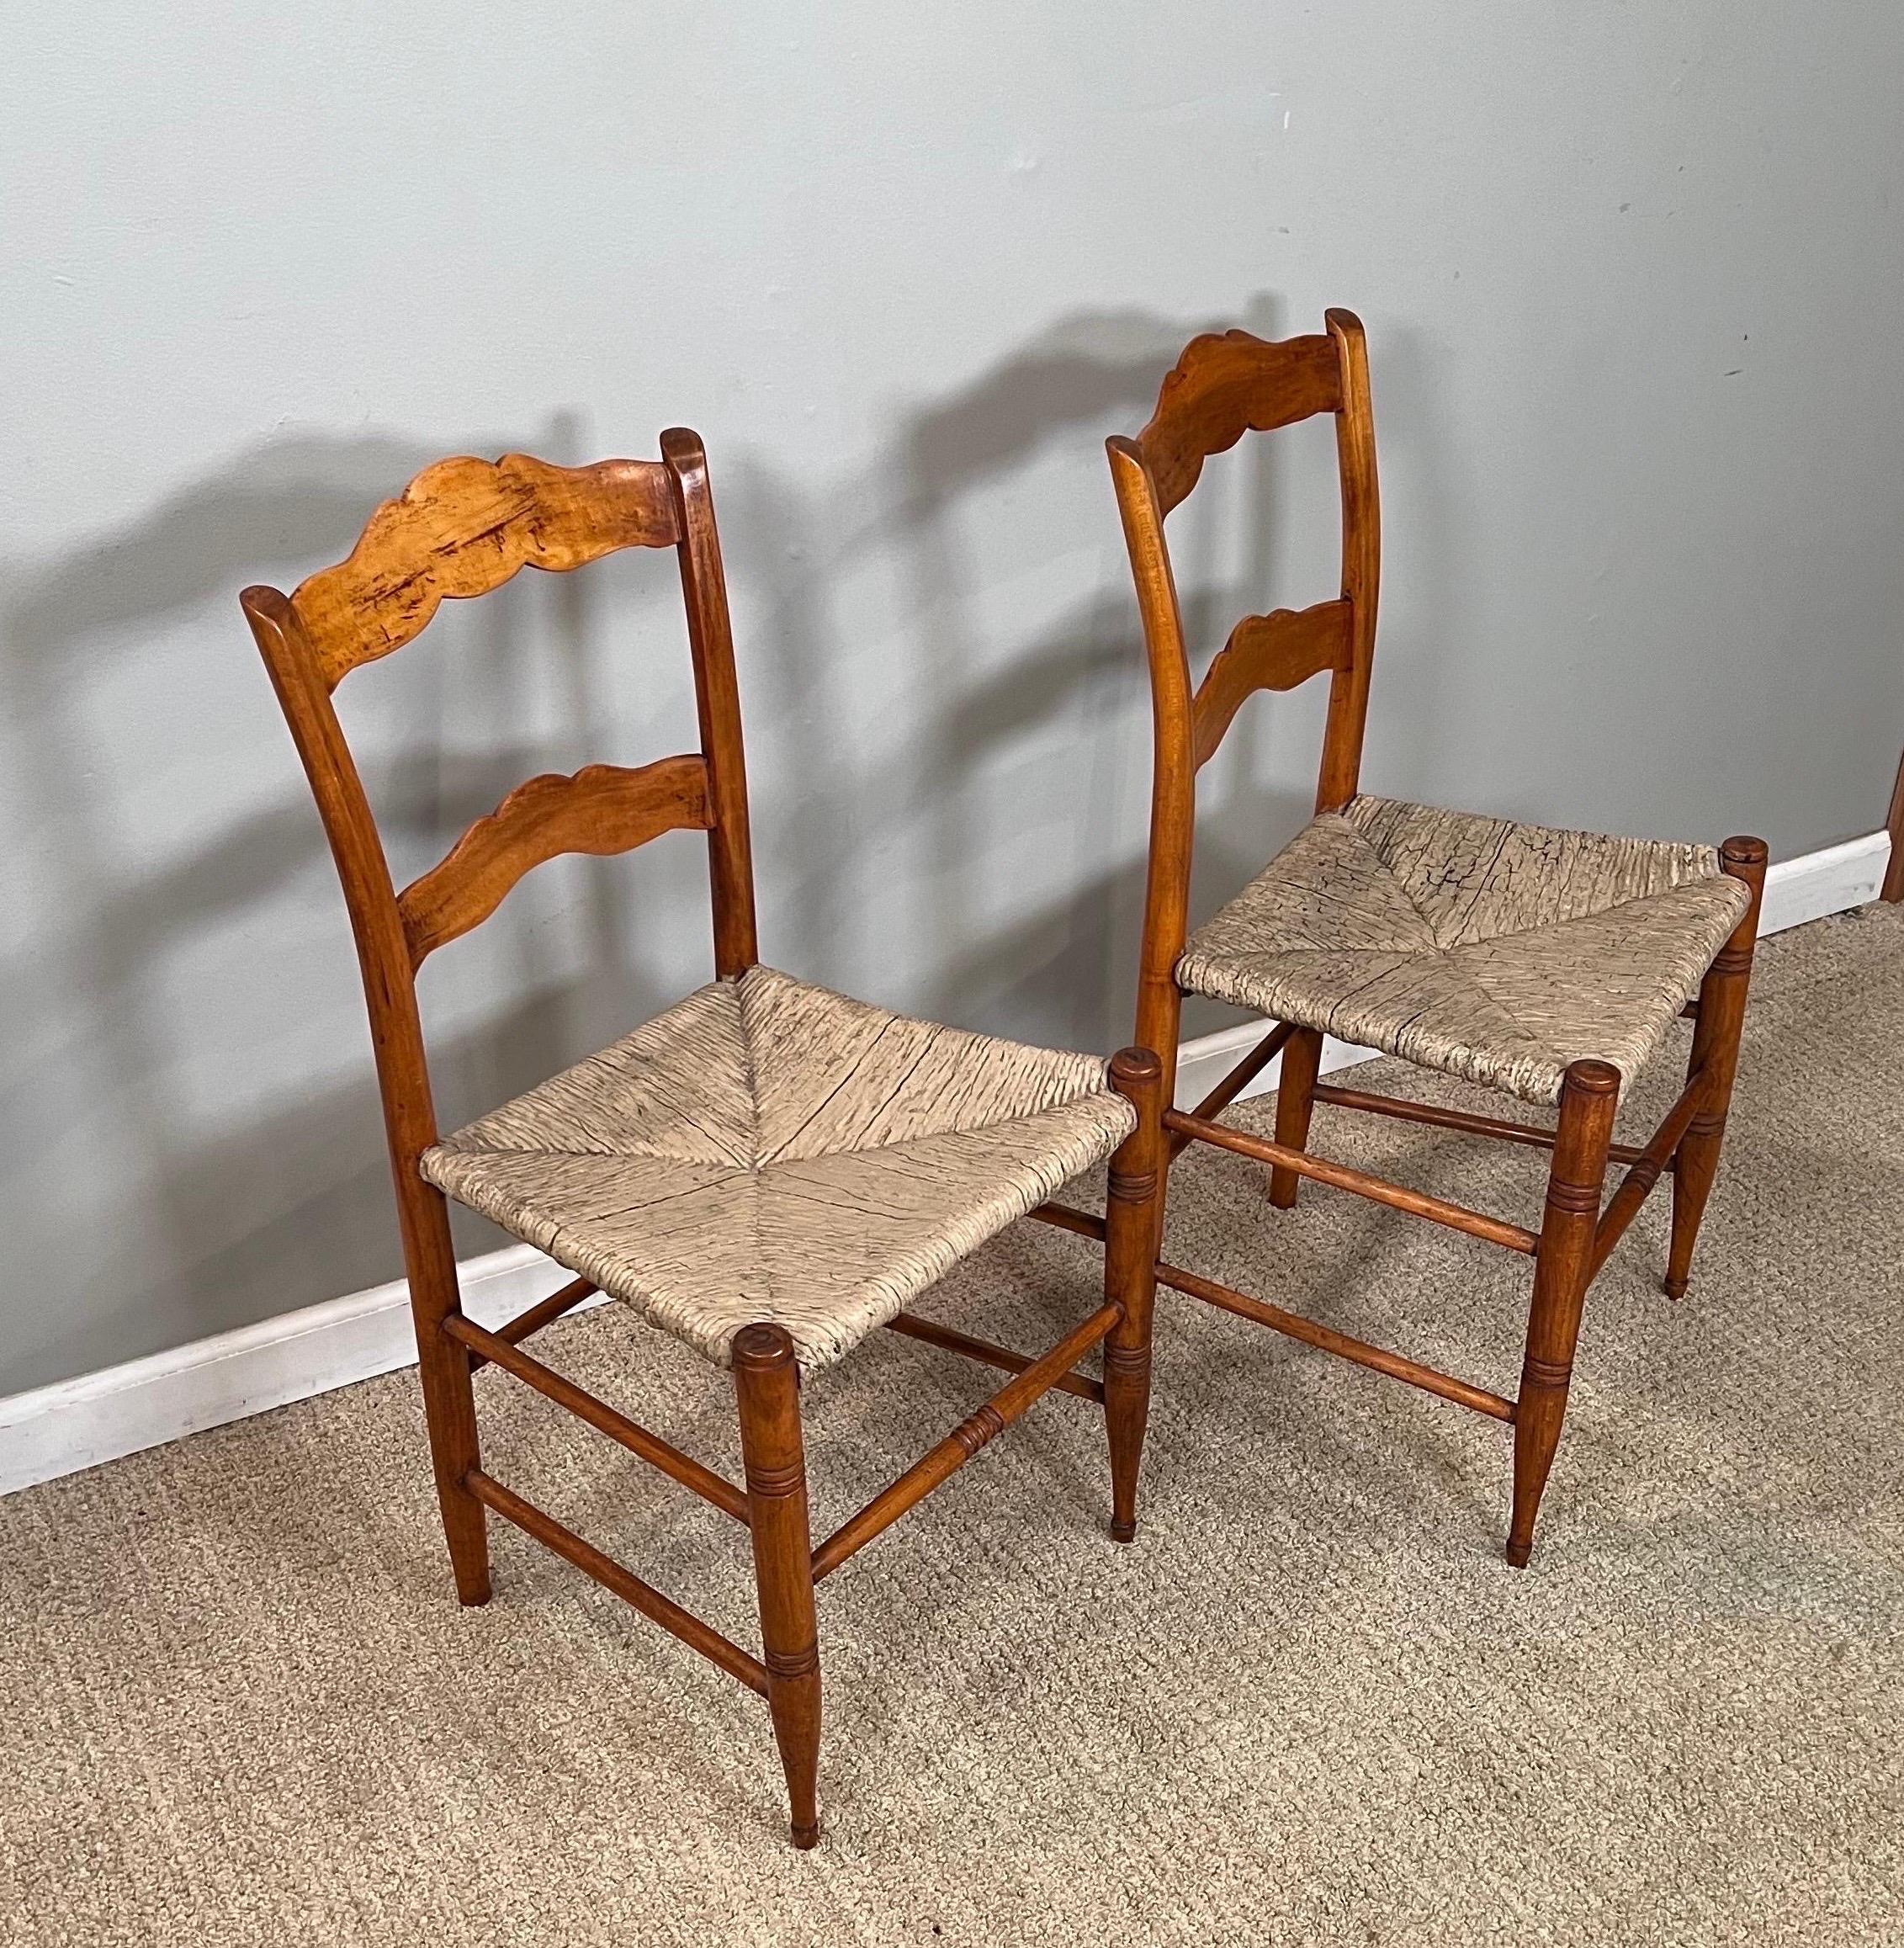 A pair of 19th century maple side chairs with rush seats. 
Seats with remnants of paint. Frames tightened. Chairs touched up & polished.